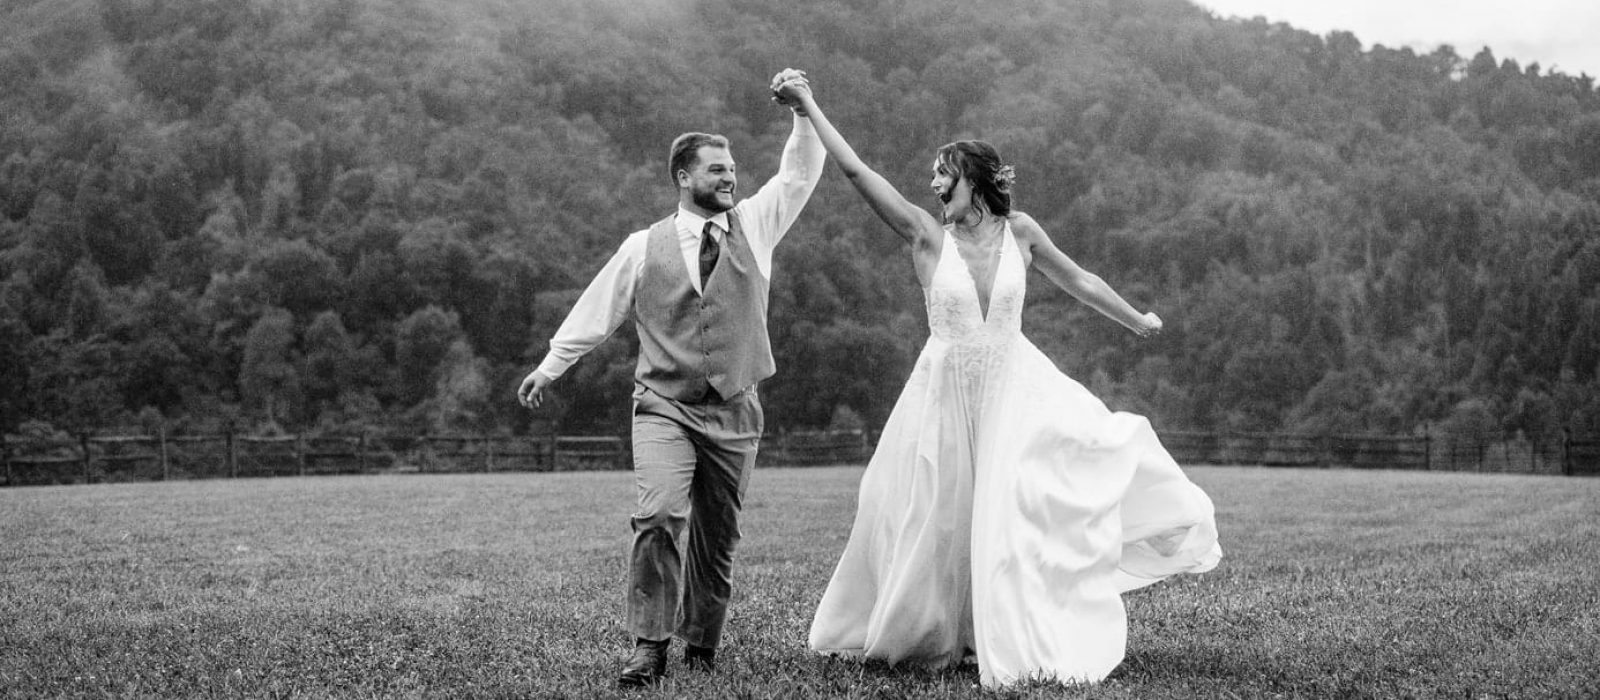 September Wedding at Claxton Farm in Weaverville, NC | Kathy Beaver Photography